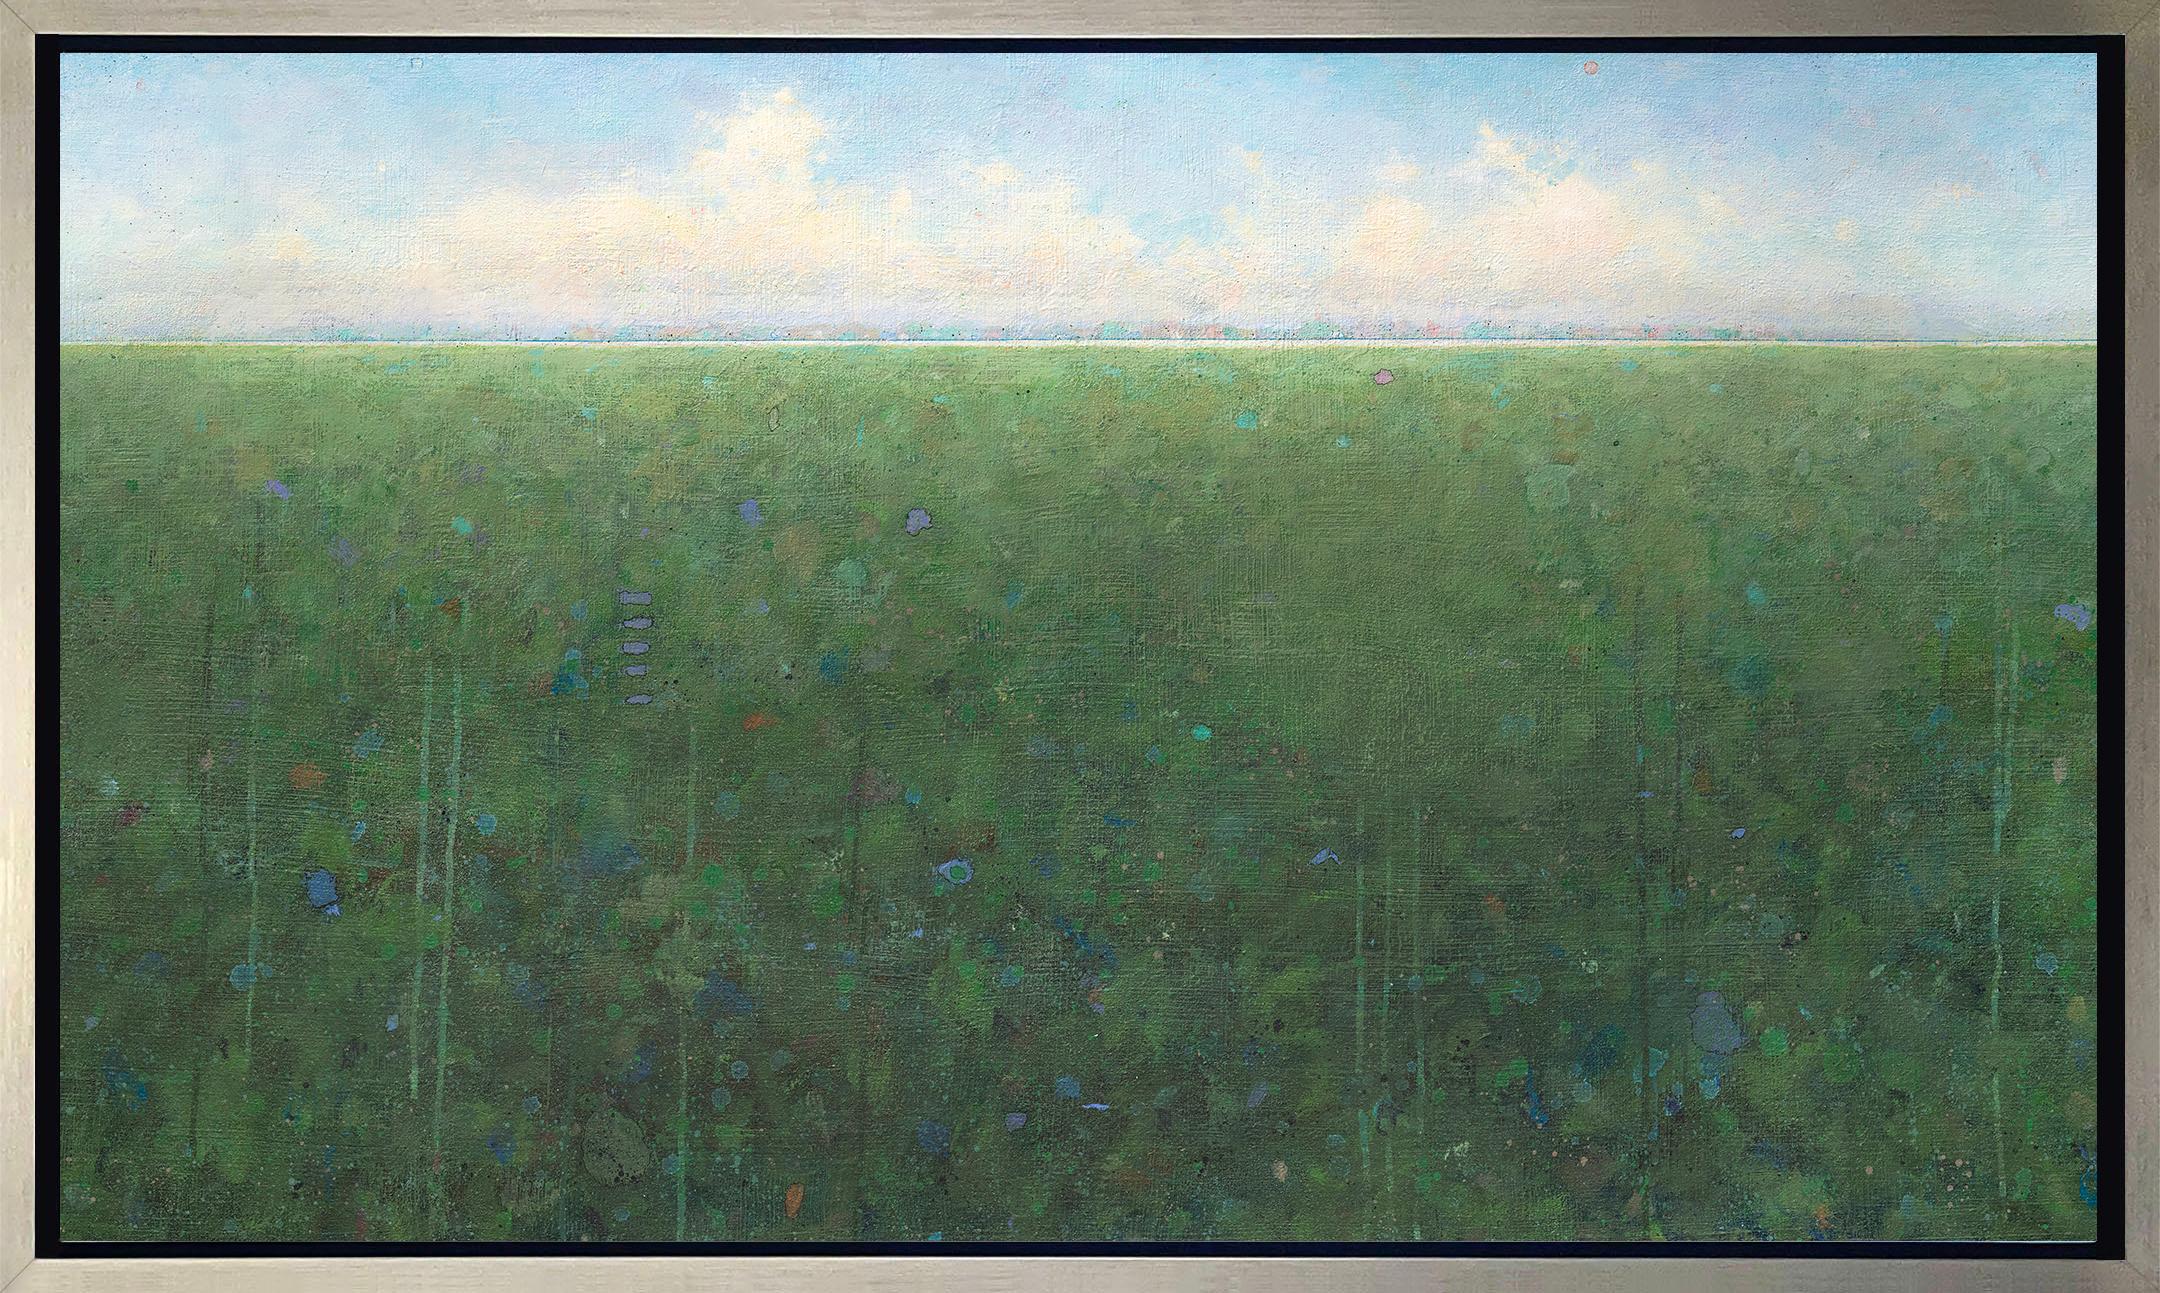 Elwood Howell Abstract Print - "Long View, " Framed Limited Edition Giclee Print, 48" x 80"